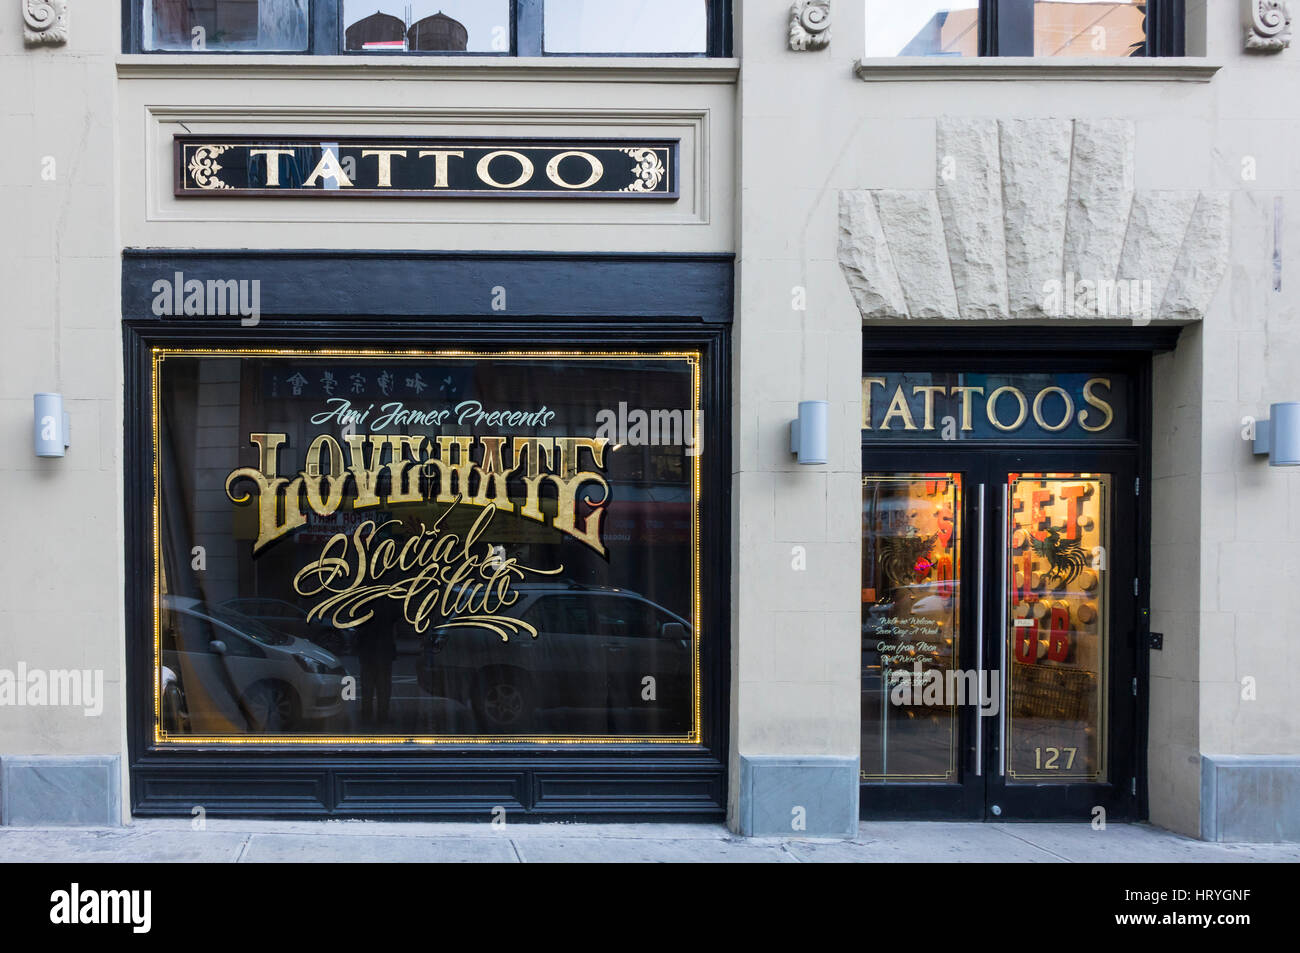 Tattooing at Love Hate Social Club in New York City Stock Photo